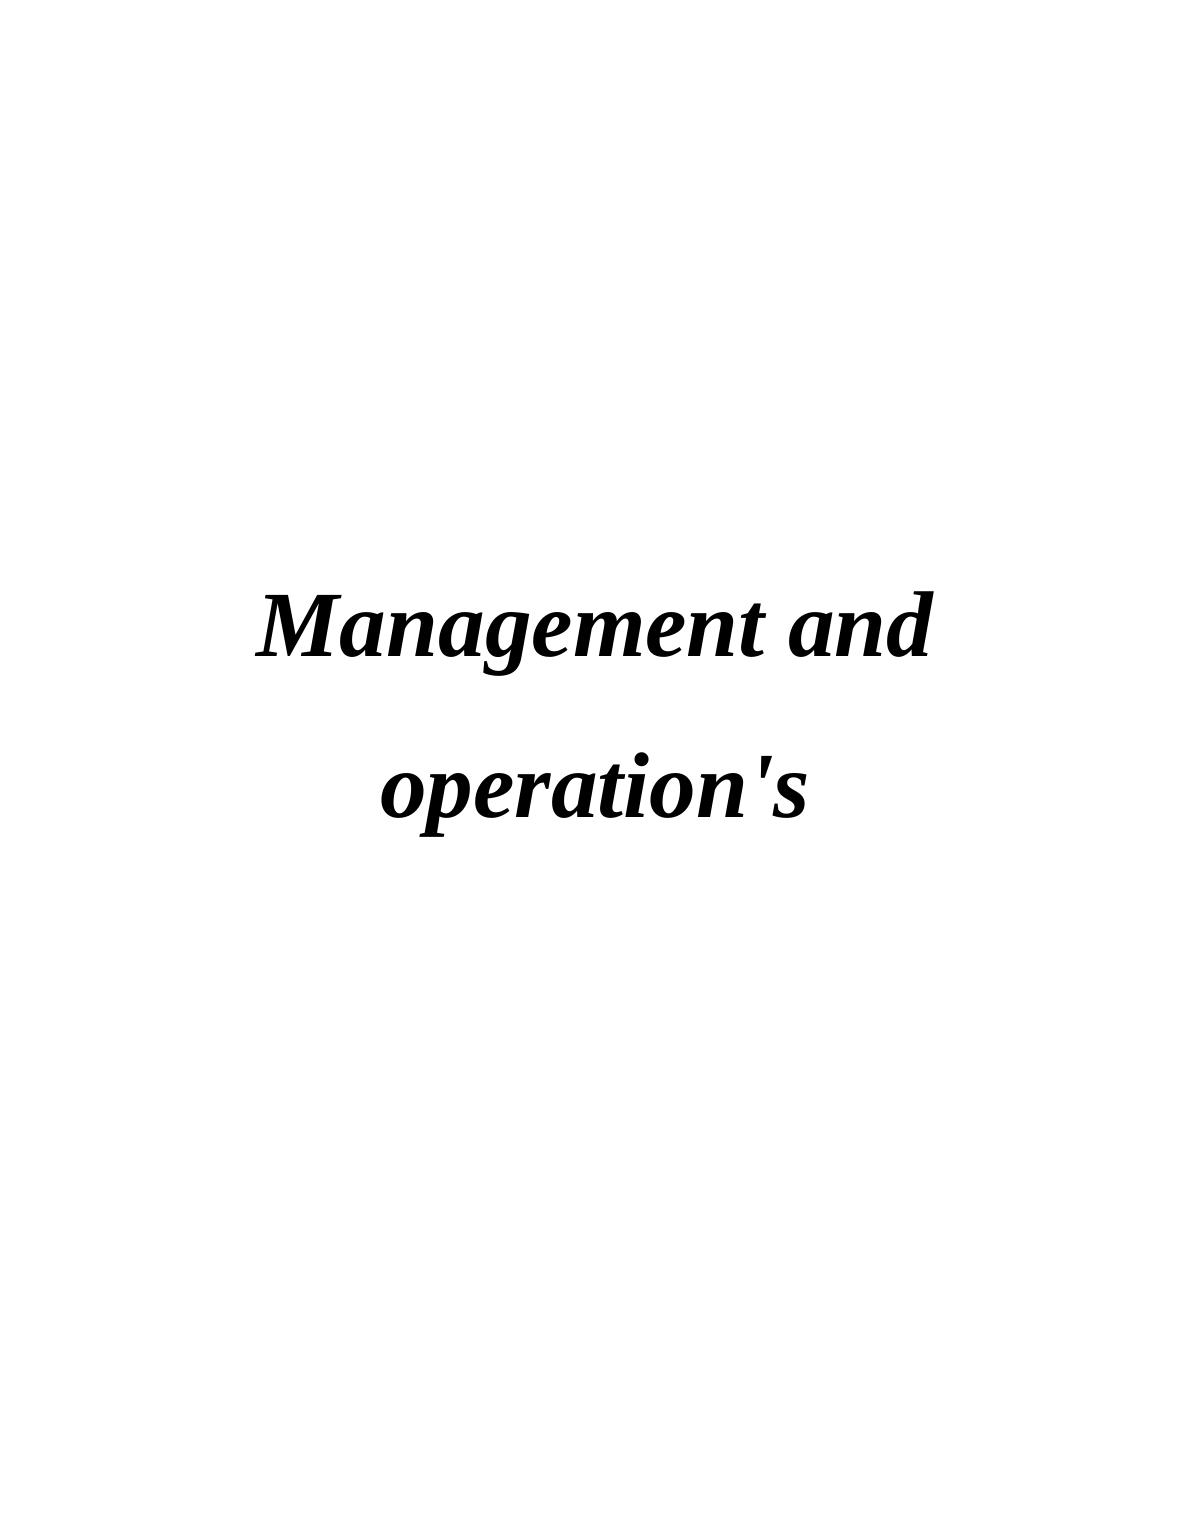 Role of Leaders and Managers in Operations Management - Starbucks_1